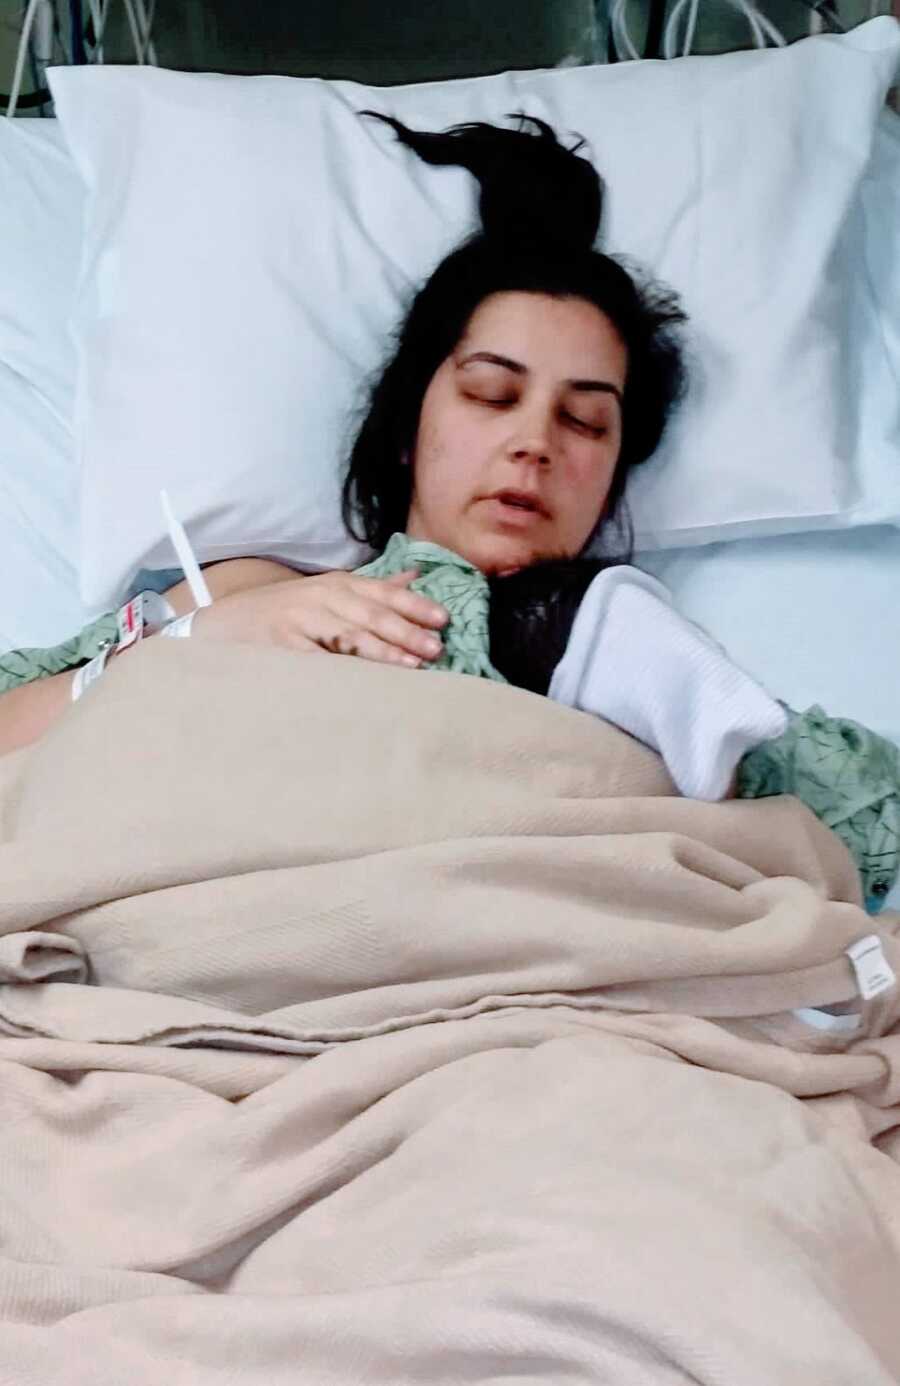 Mother lying in hospital bed with newborn baby